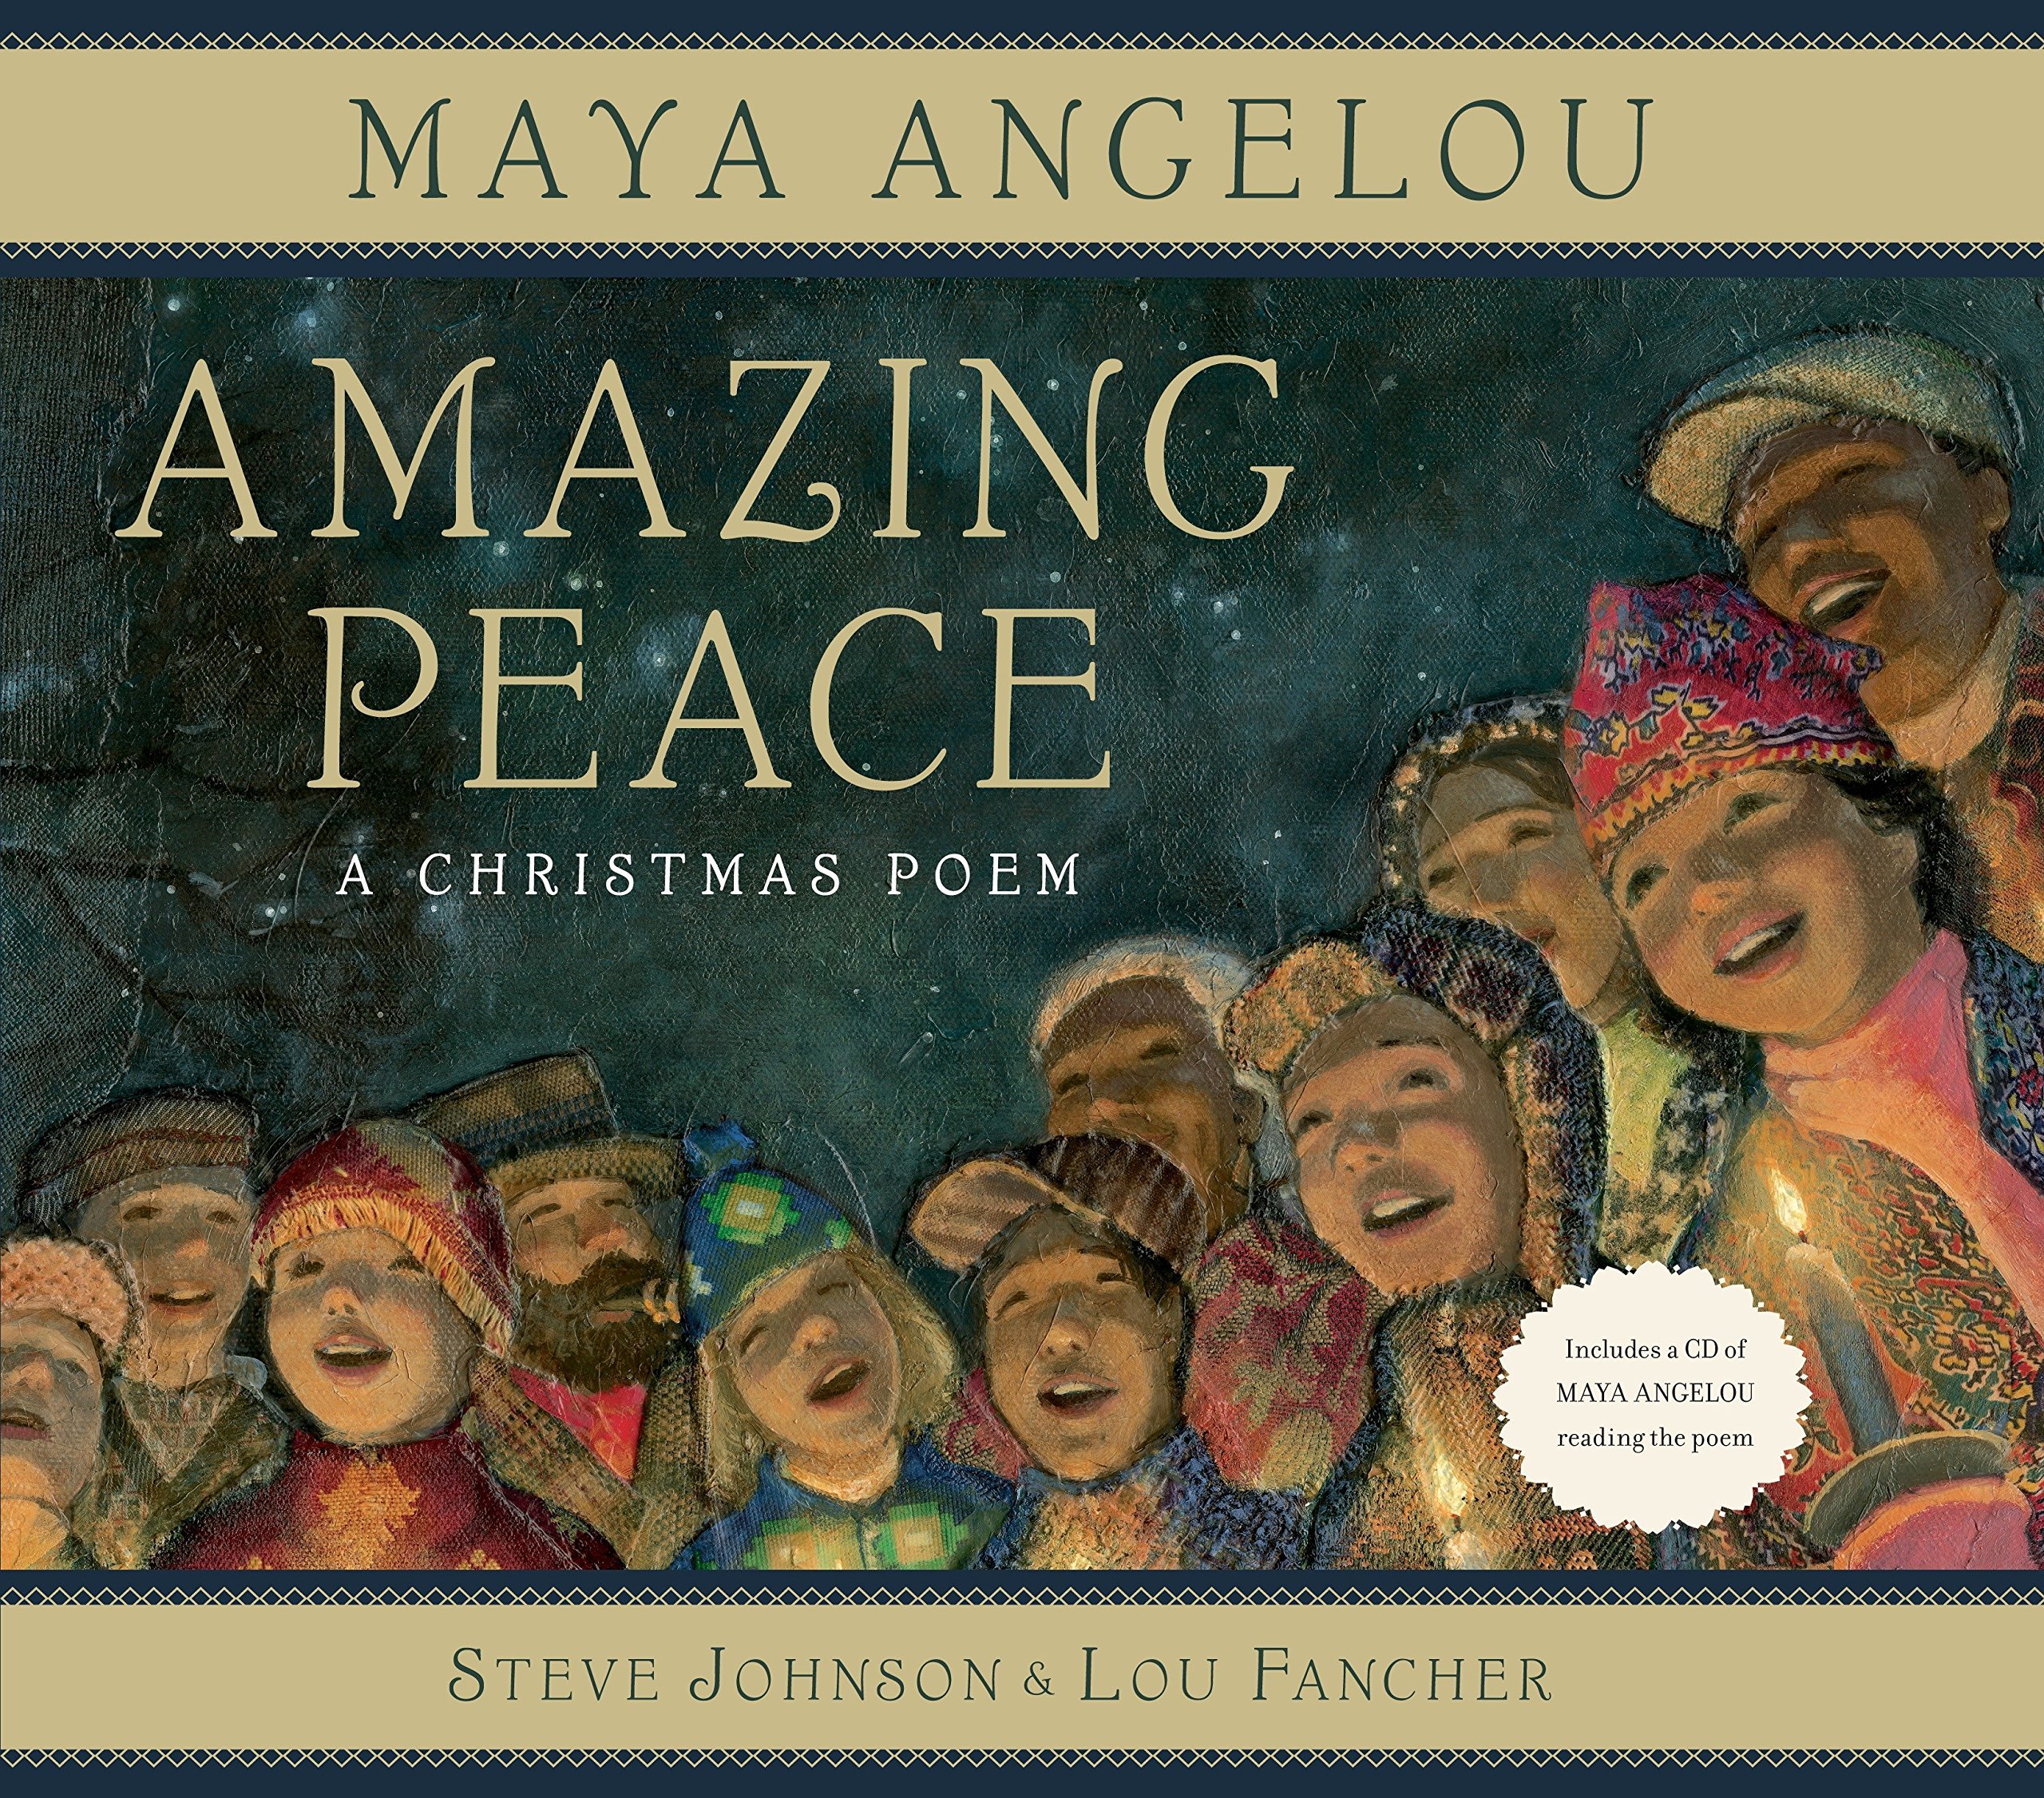 Amazing Peace A Christmas Poem by Maya Angelou book cover